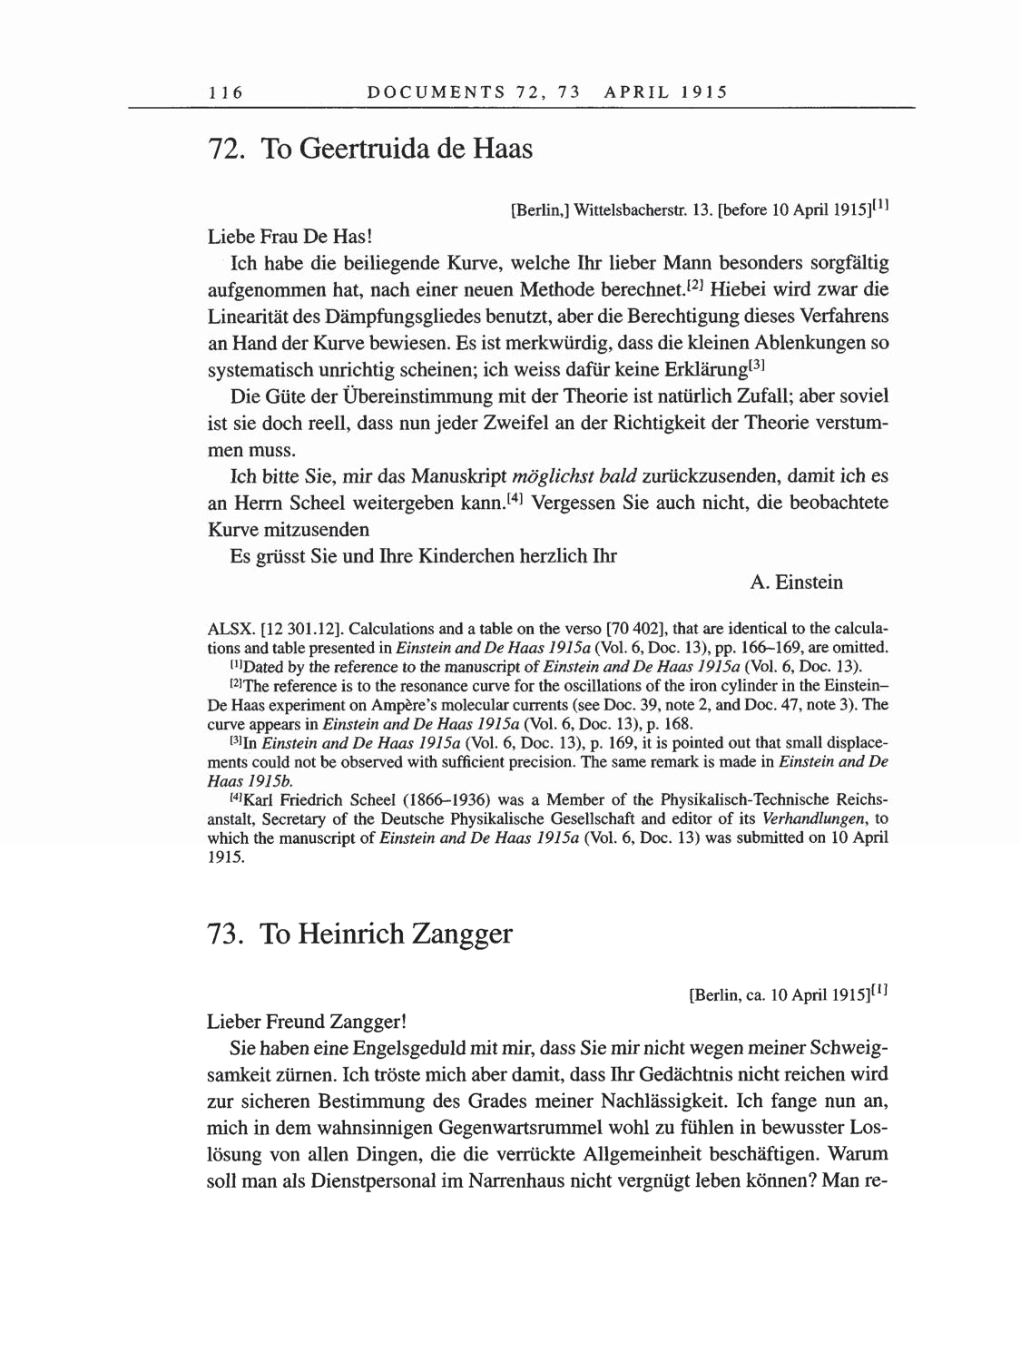 Volume 8, Part A: The Berlin Years: Correspondence 1914-1917 page 116